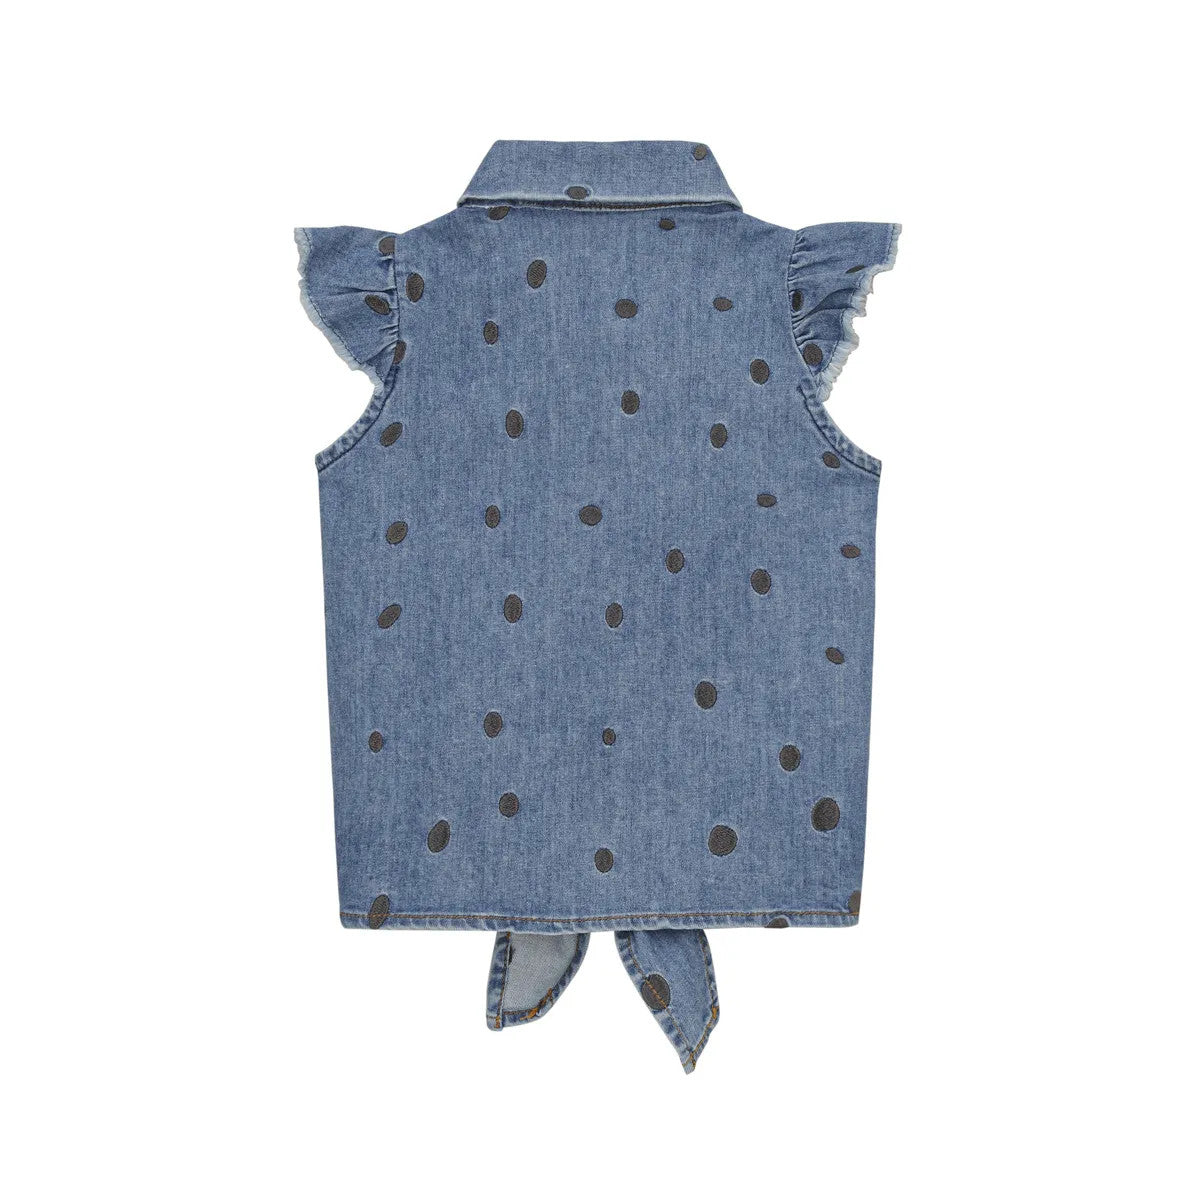 Little Hedonist light blue denim knotted sleeveless shirt with bleached stains. Sustainable kids fashion made from our best organic cotton denim. Superfashion for girls!